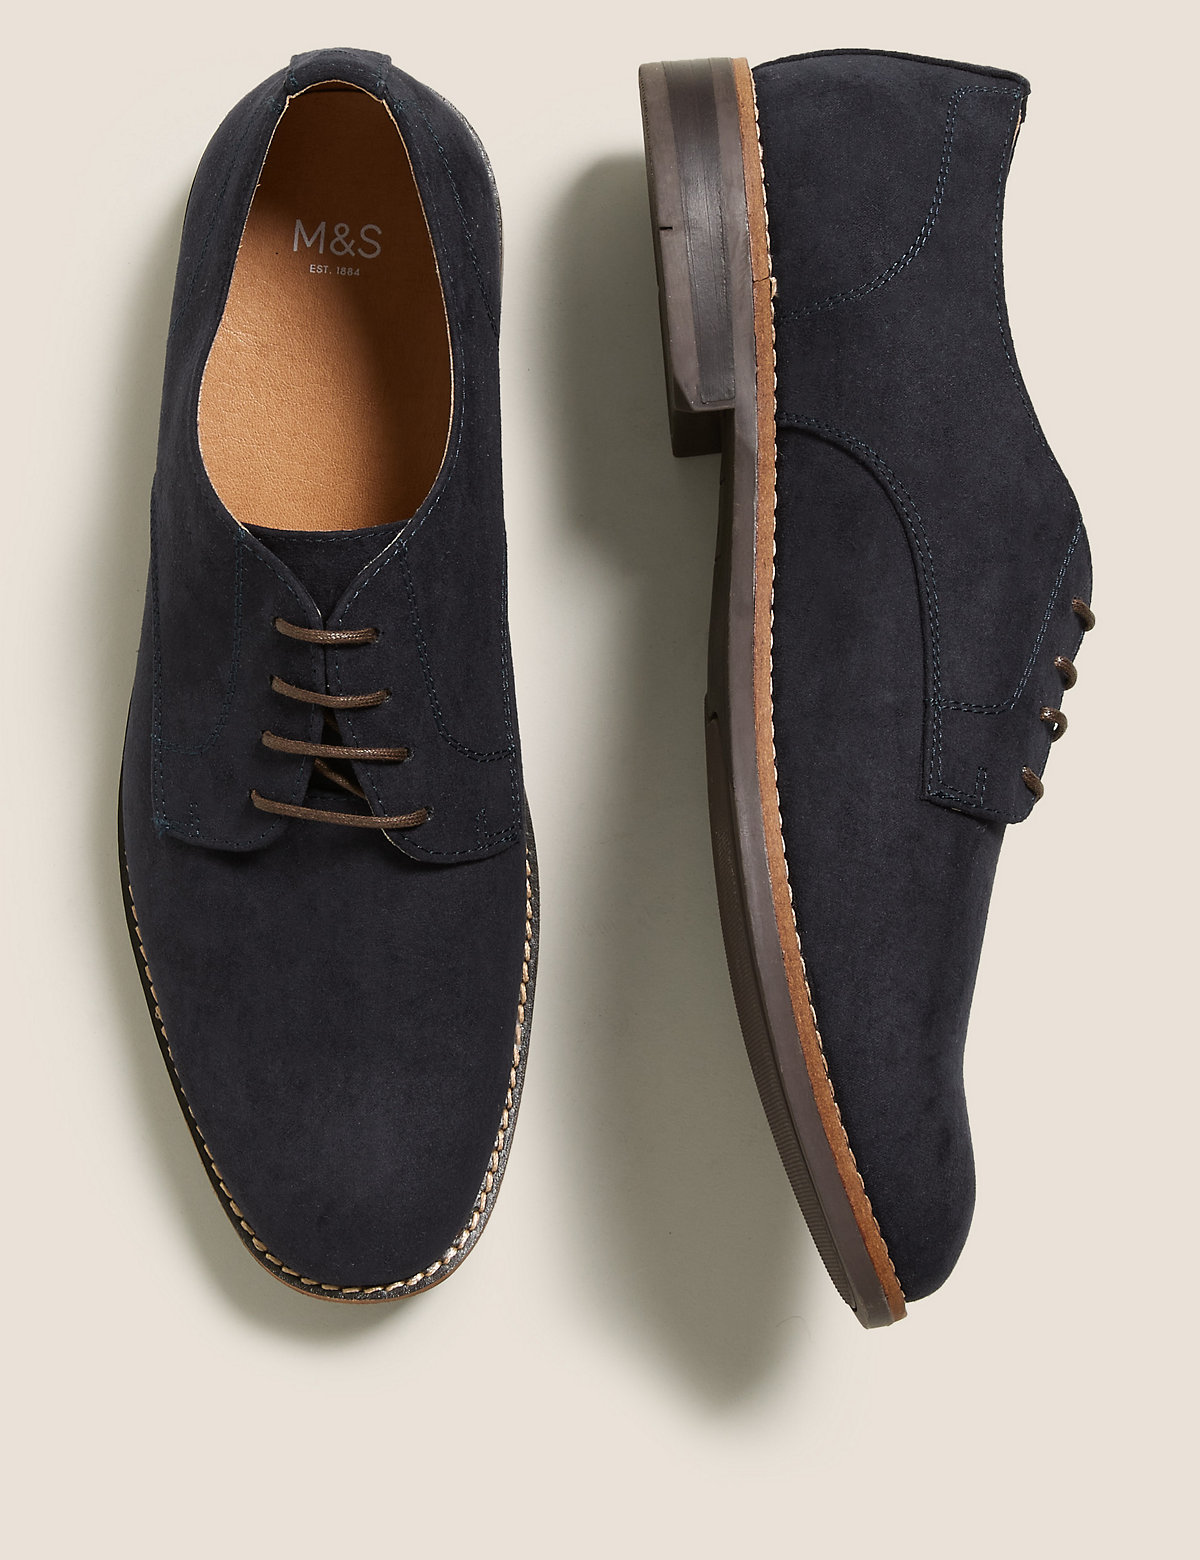 Derby Shoes